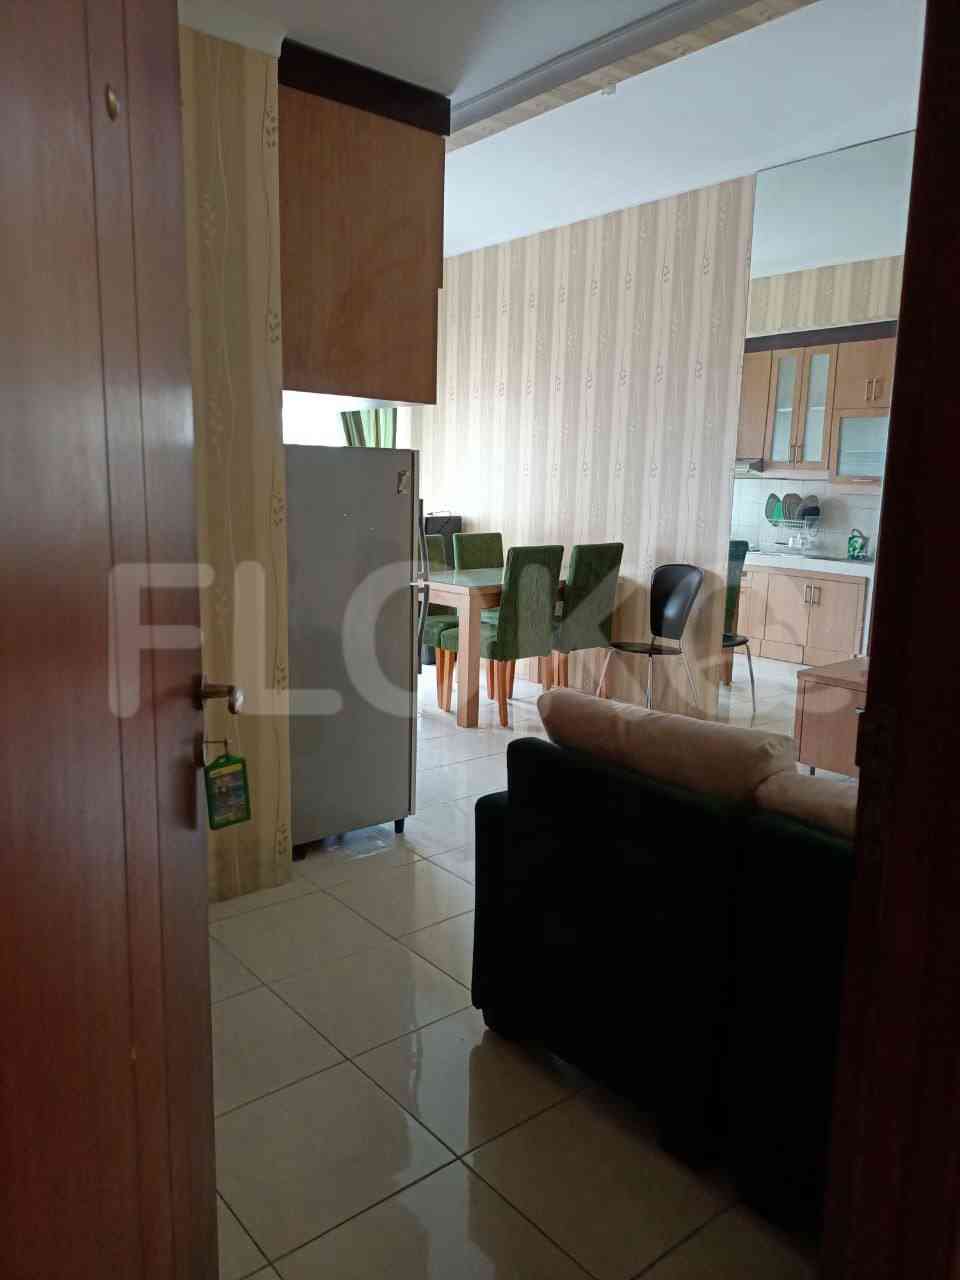 2 Bedroom on 7th Floor for Rent in Sudirman Park Apartment - ftad1f 6